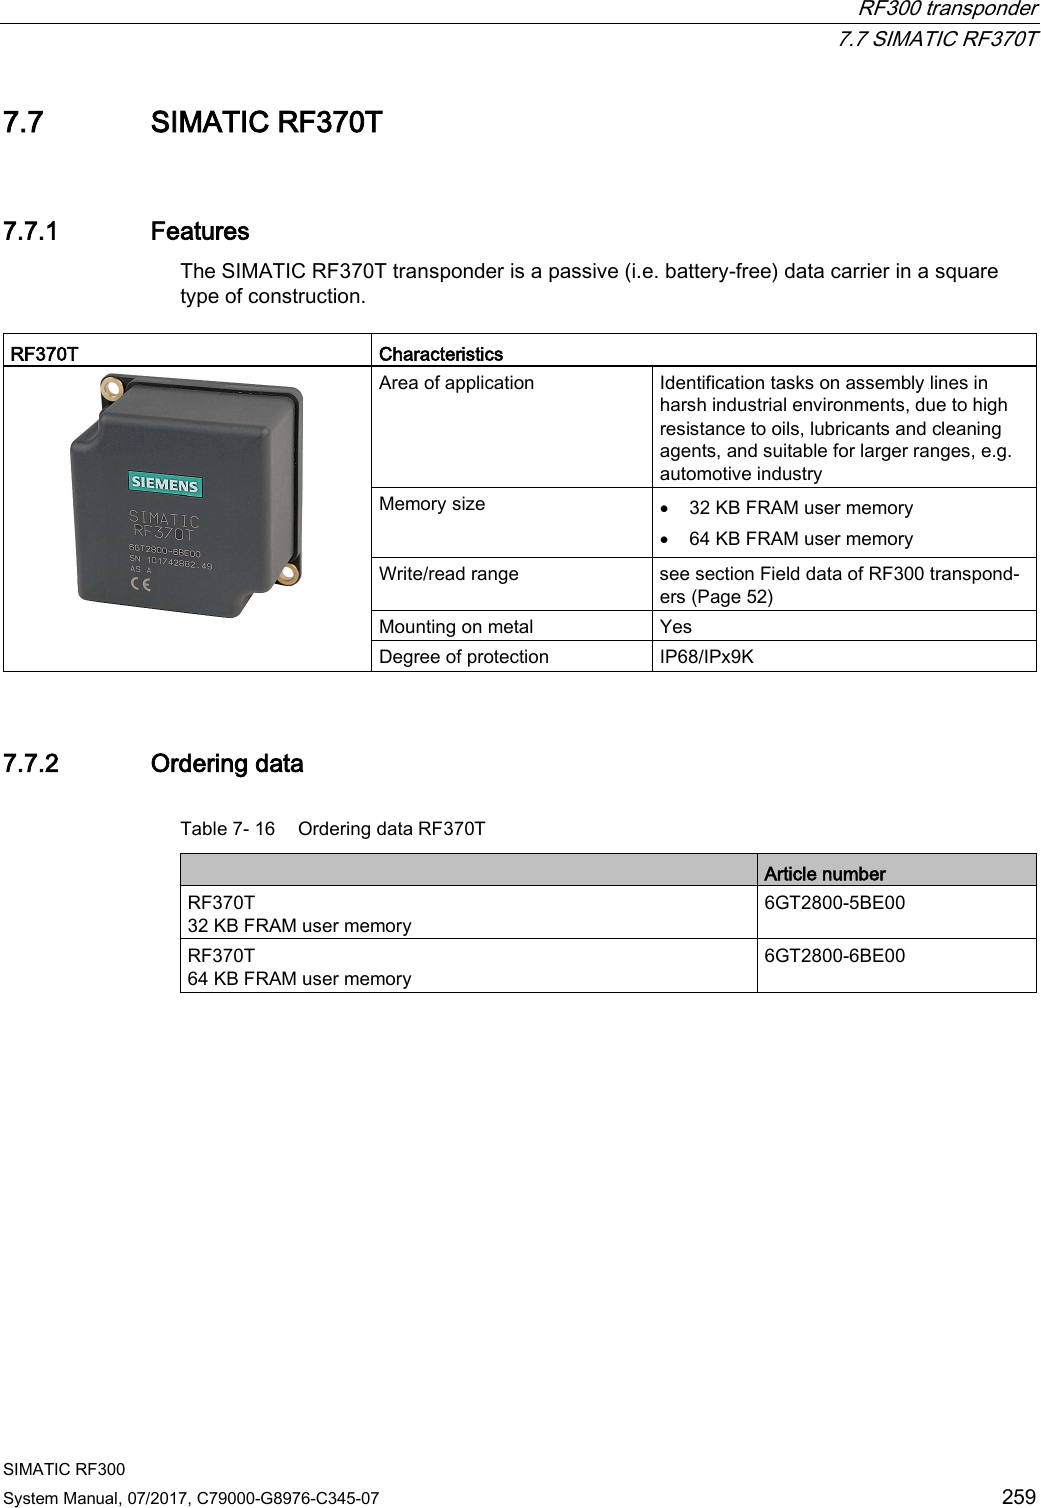  RF300 transponder  7.7 SIMATIC RF370T SIMATIC RF300 System Manual, 07/2017, C79000-G8976-C345-07 259 7.7 SIMATIC RF370T 7.7.1 Features The SIMATIC RF370T transponder is a passive (i.e. battery-free) data carrier in a square type of construction.   RF370T Characteristics    Area of application Identification tasks on assembly lines in harsh industrial environments, due to high resistance to oils, lubricants and cleaning agents, and suitable for larger ranges, e.g. automotive industry Memory size • 32 KB FRAM user memory • 64 KB FRAM user memory Write/read range see section Field data of RF300 transpond-ers (Page 52)  Mounting on metal Yes Degree of protection IP68/IPx9K 7.7.2 Ordering data Table 7- 16 Ordering data RF370T  Article number RF370T  32 KB FRAM user memory 6GT2800-5BE00 RF370T  64 KB FRAM user memory 6GT2800-6BE00 